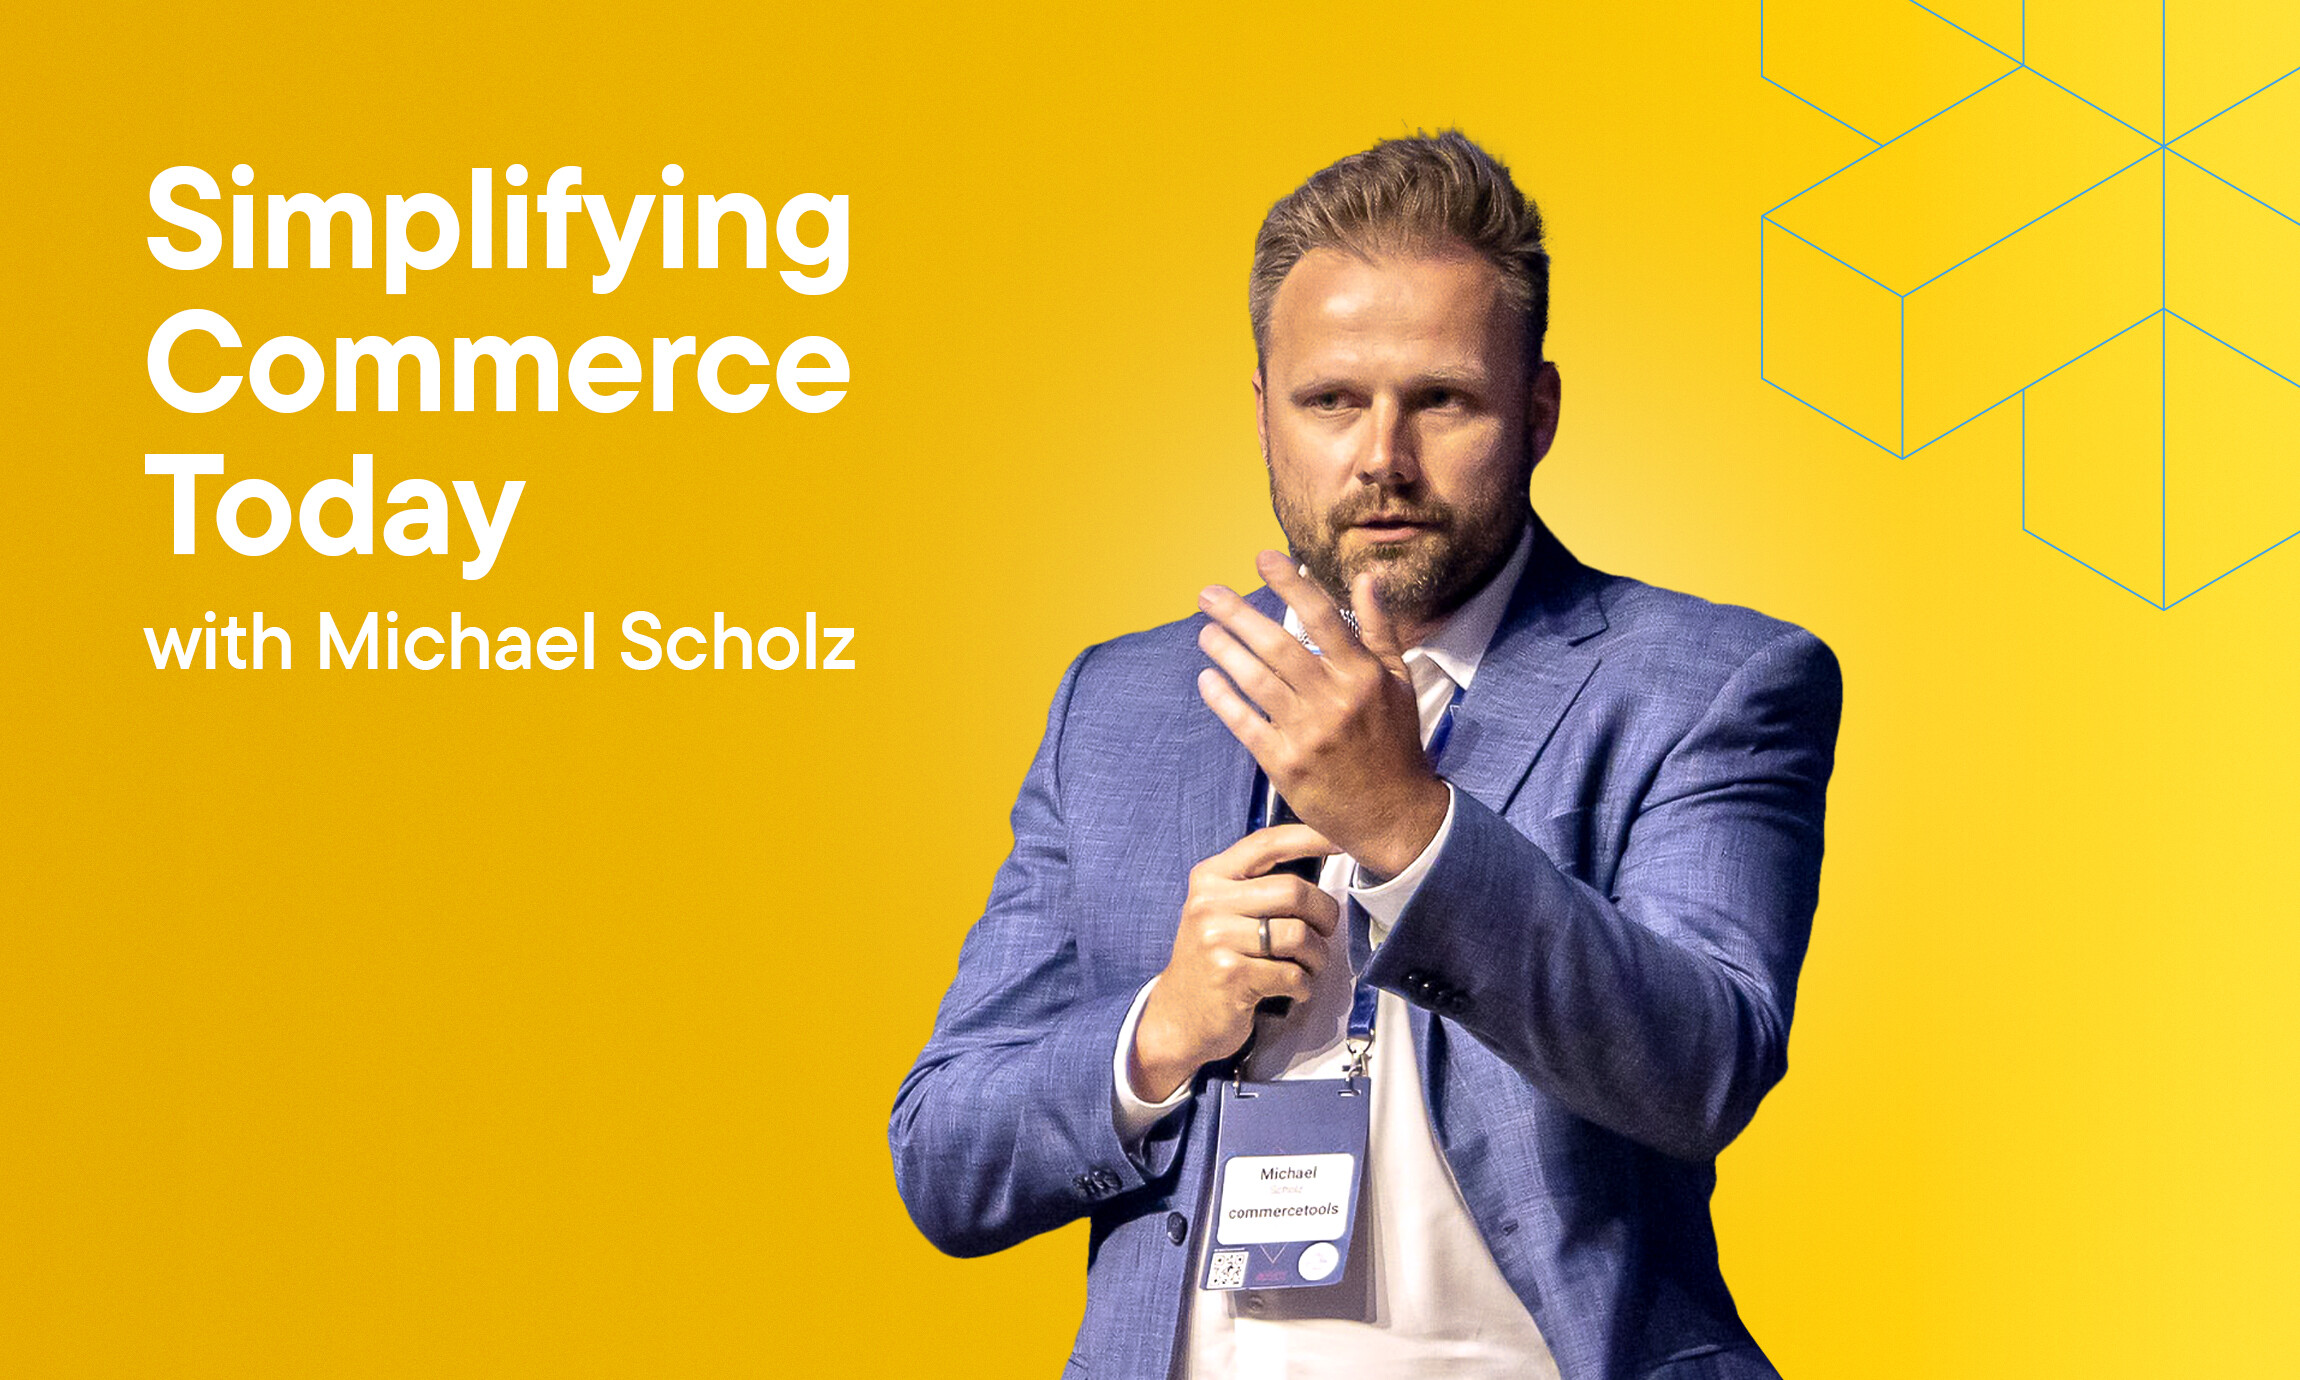 Simplifying commerce today with Michael Scholz